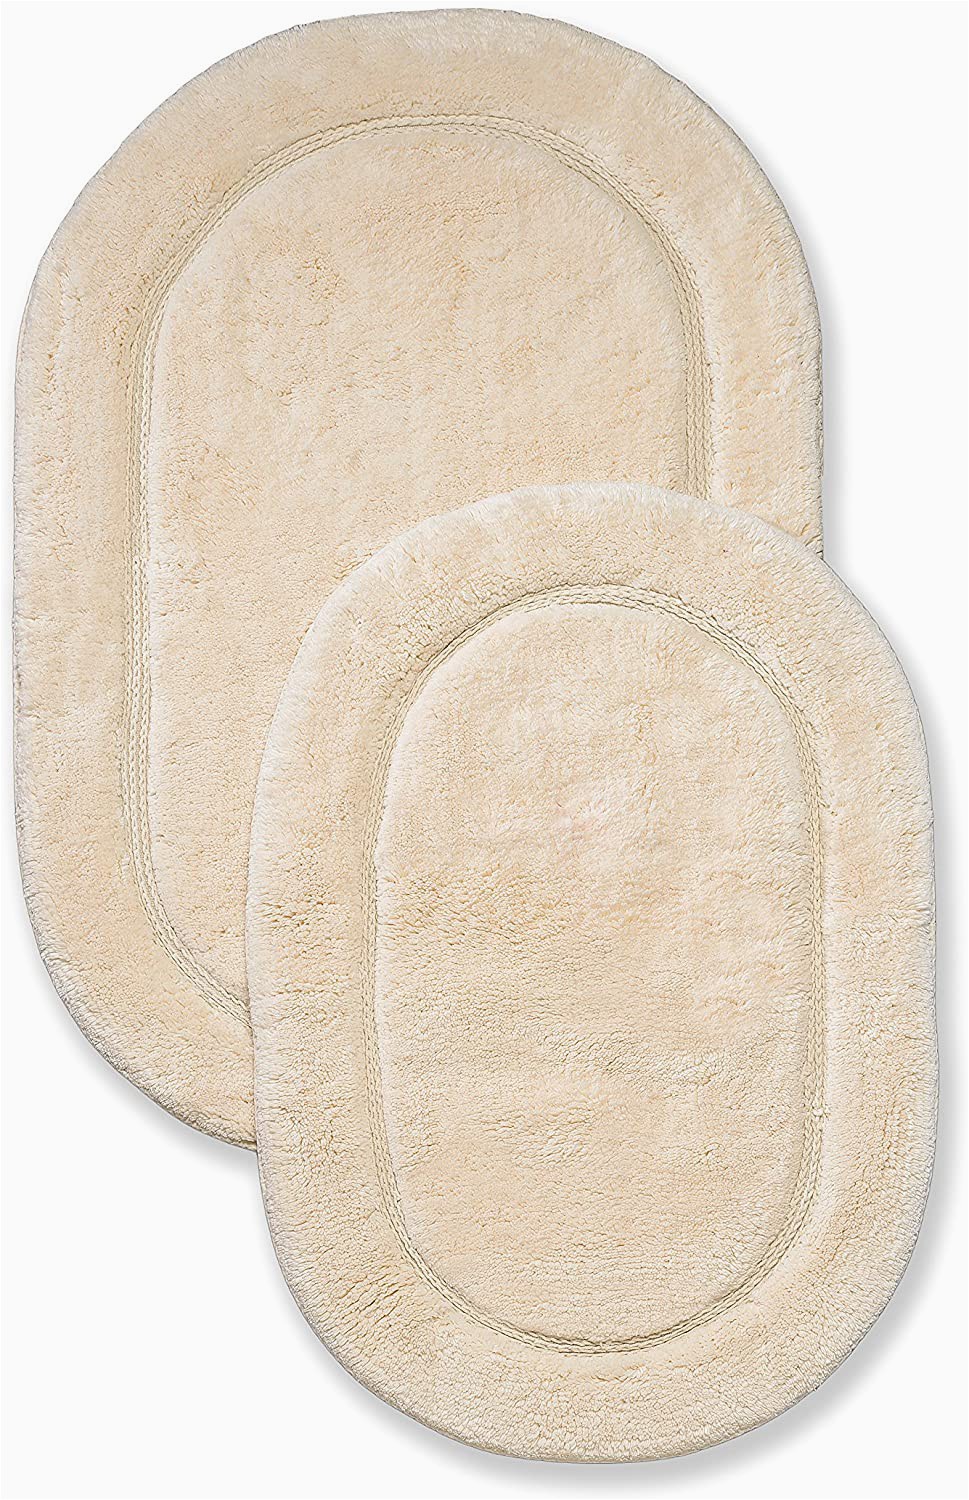 Extra Large Oval Bath Rugs Superior Bath Rugs Set Cotton for Bathroom Non Slip Oval Design 2 Piece Ivory